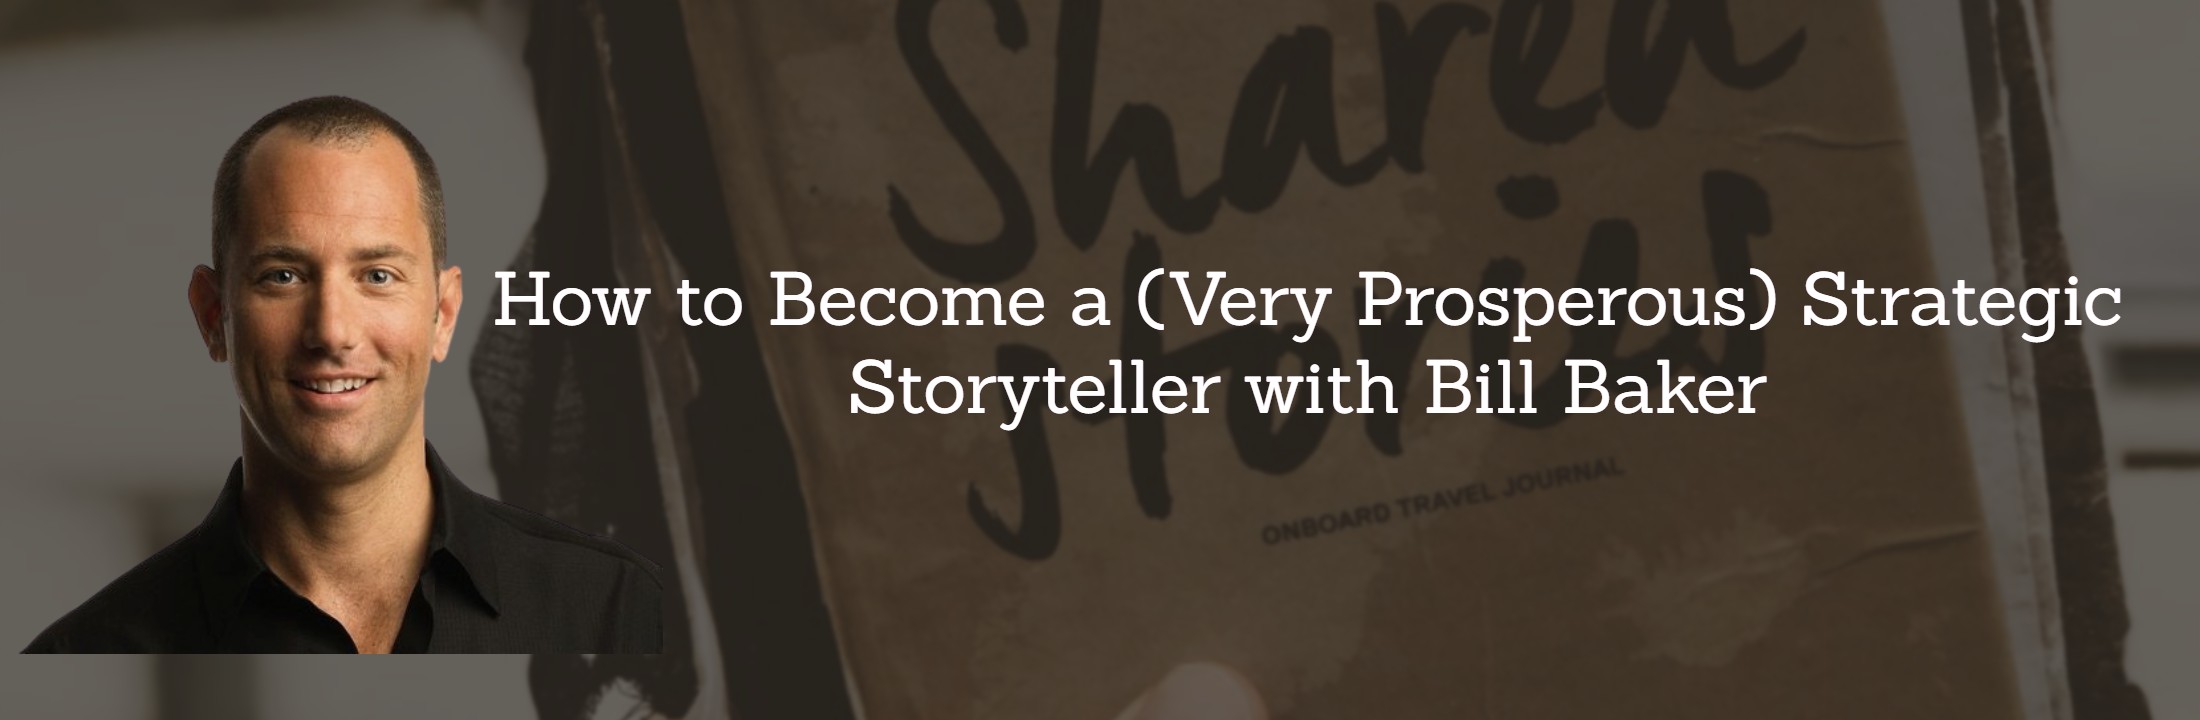 How To Incorporate Content Marketing Story Telling Brightideas Co